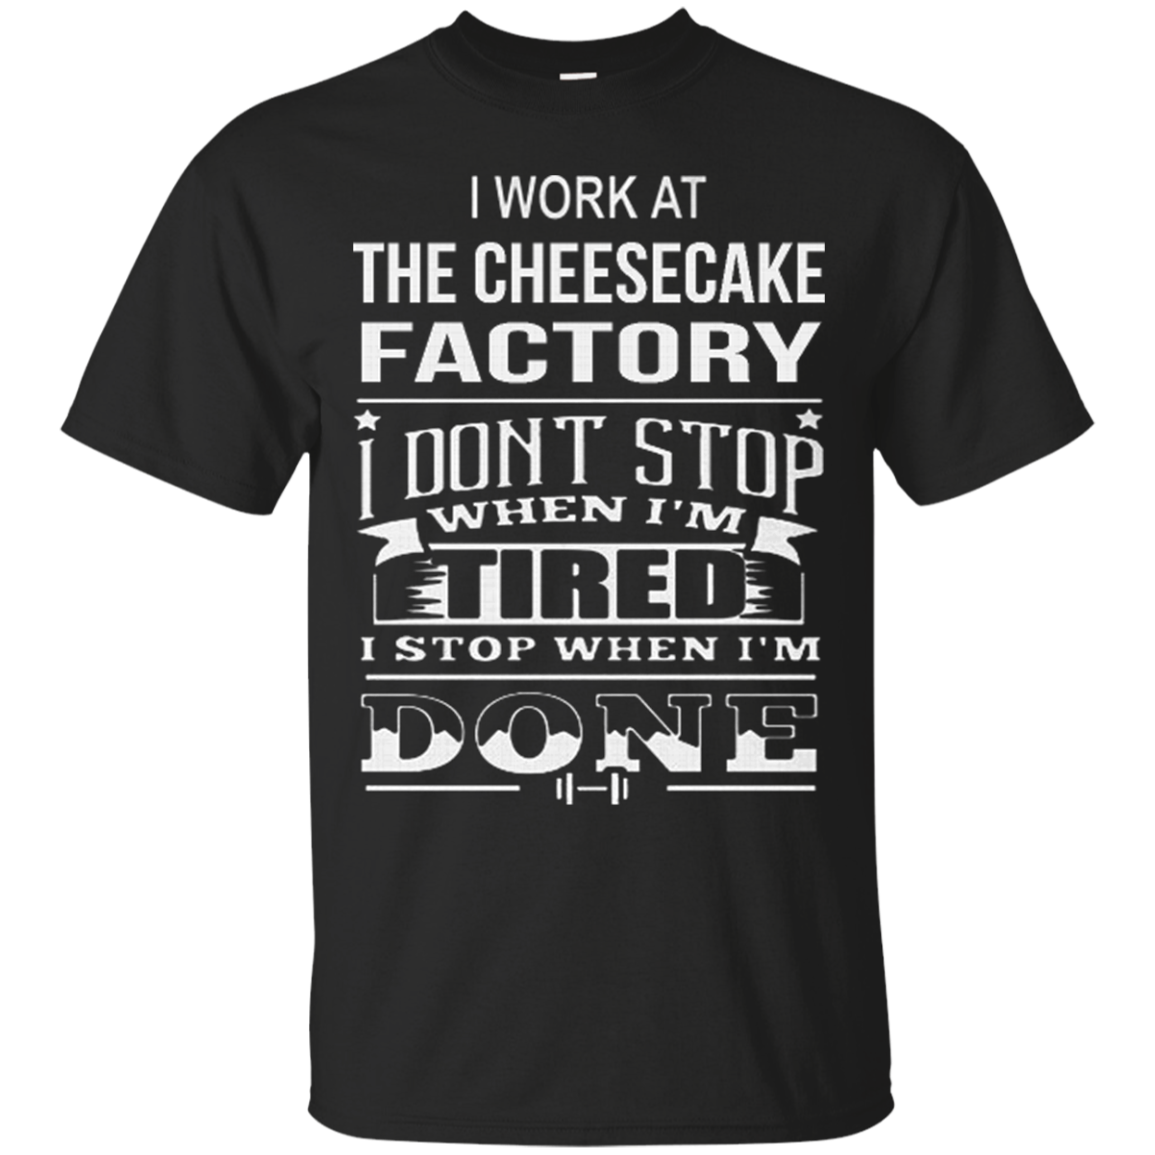 The Cheesecake Factory Worker Shirts I Work At The Cheesecake Factory ...